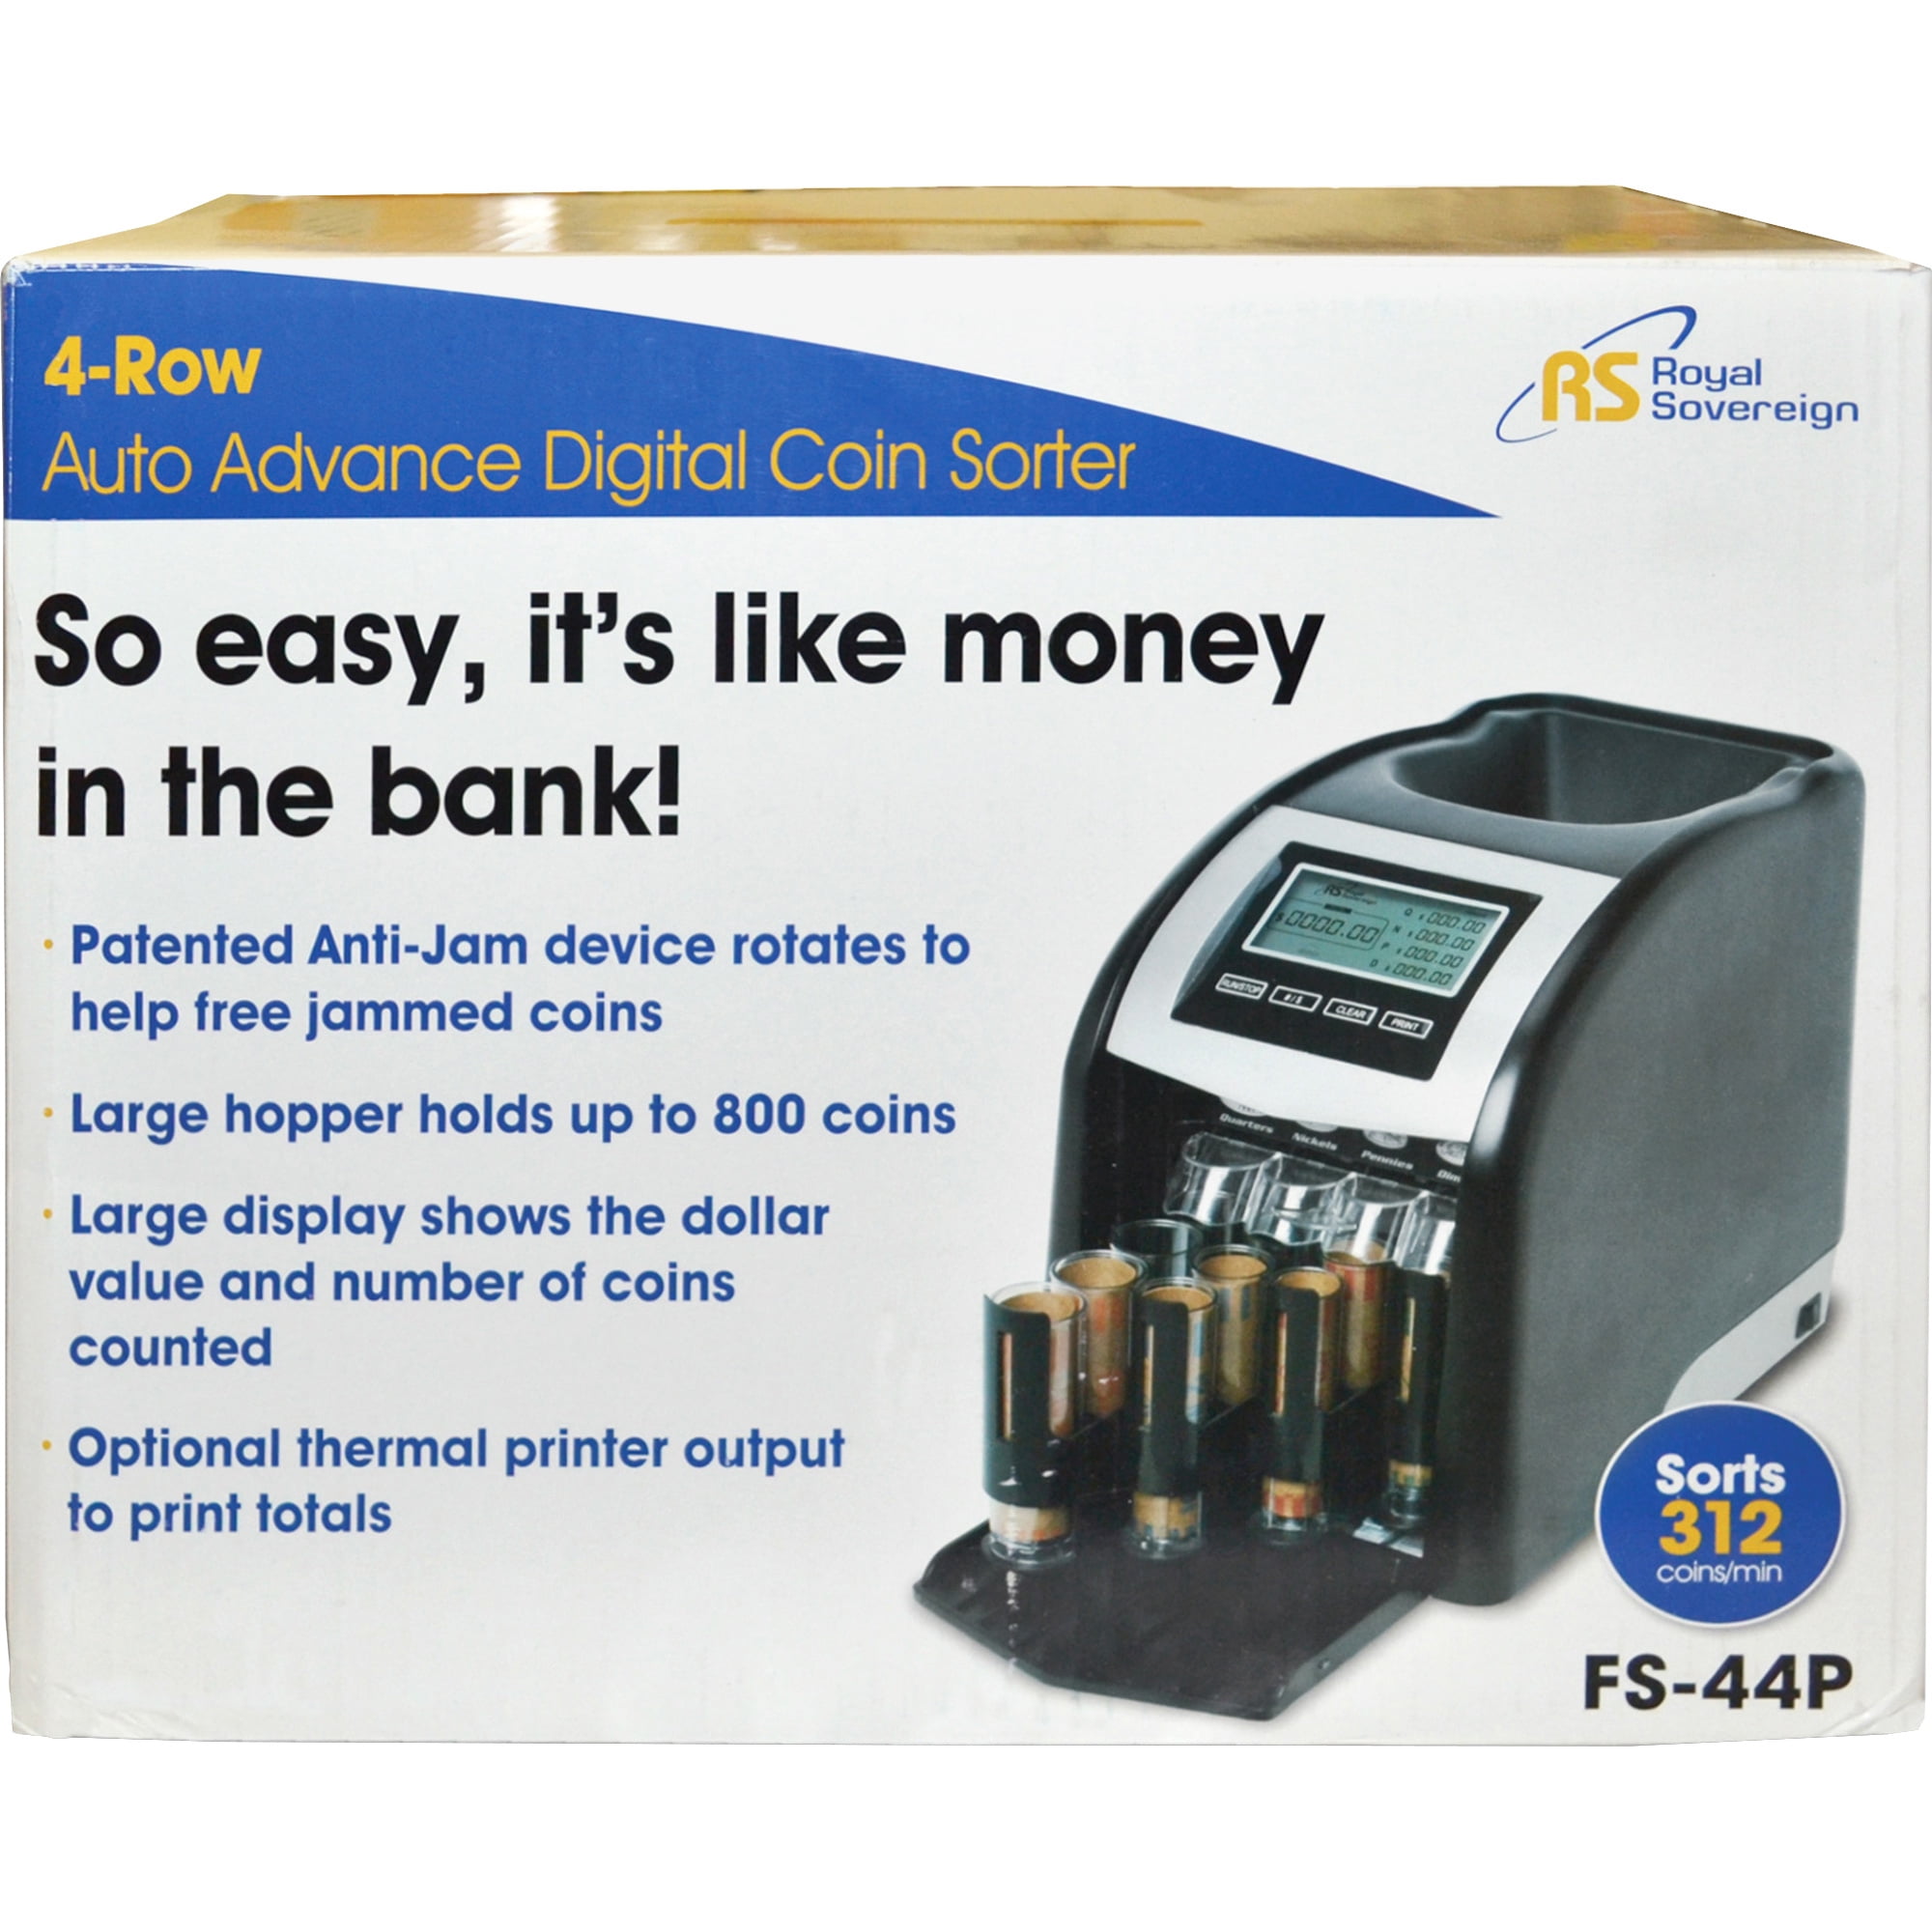 New 4 Row Electric Coin Counter with Patented Anti-Jam Technology & Digital Counting Display,Black 